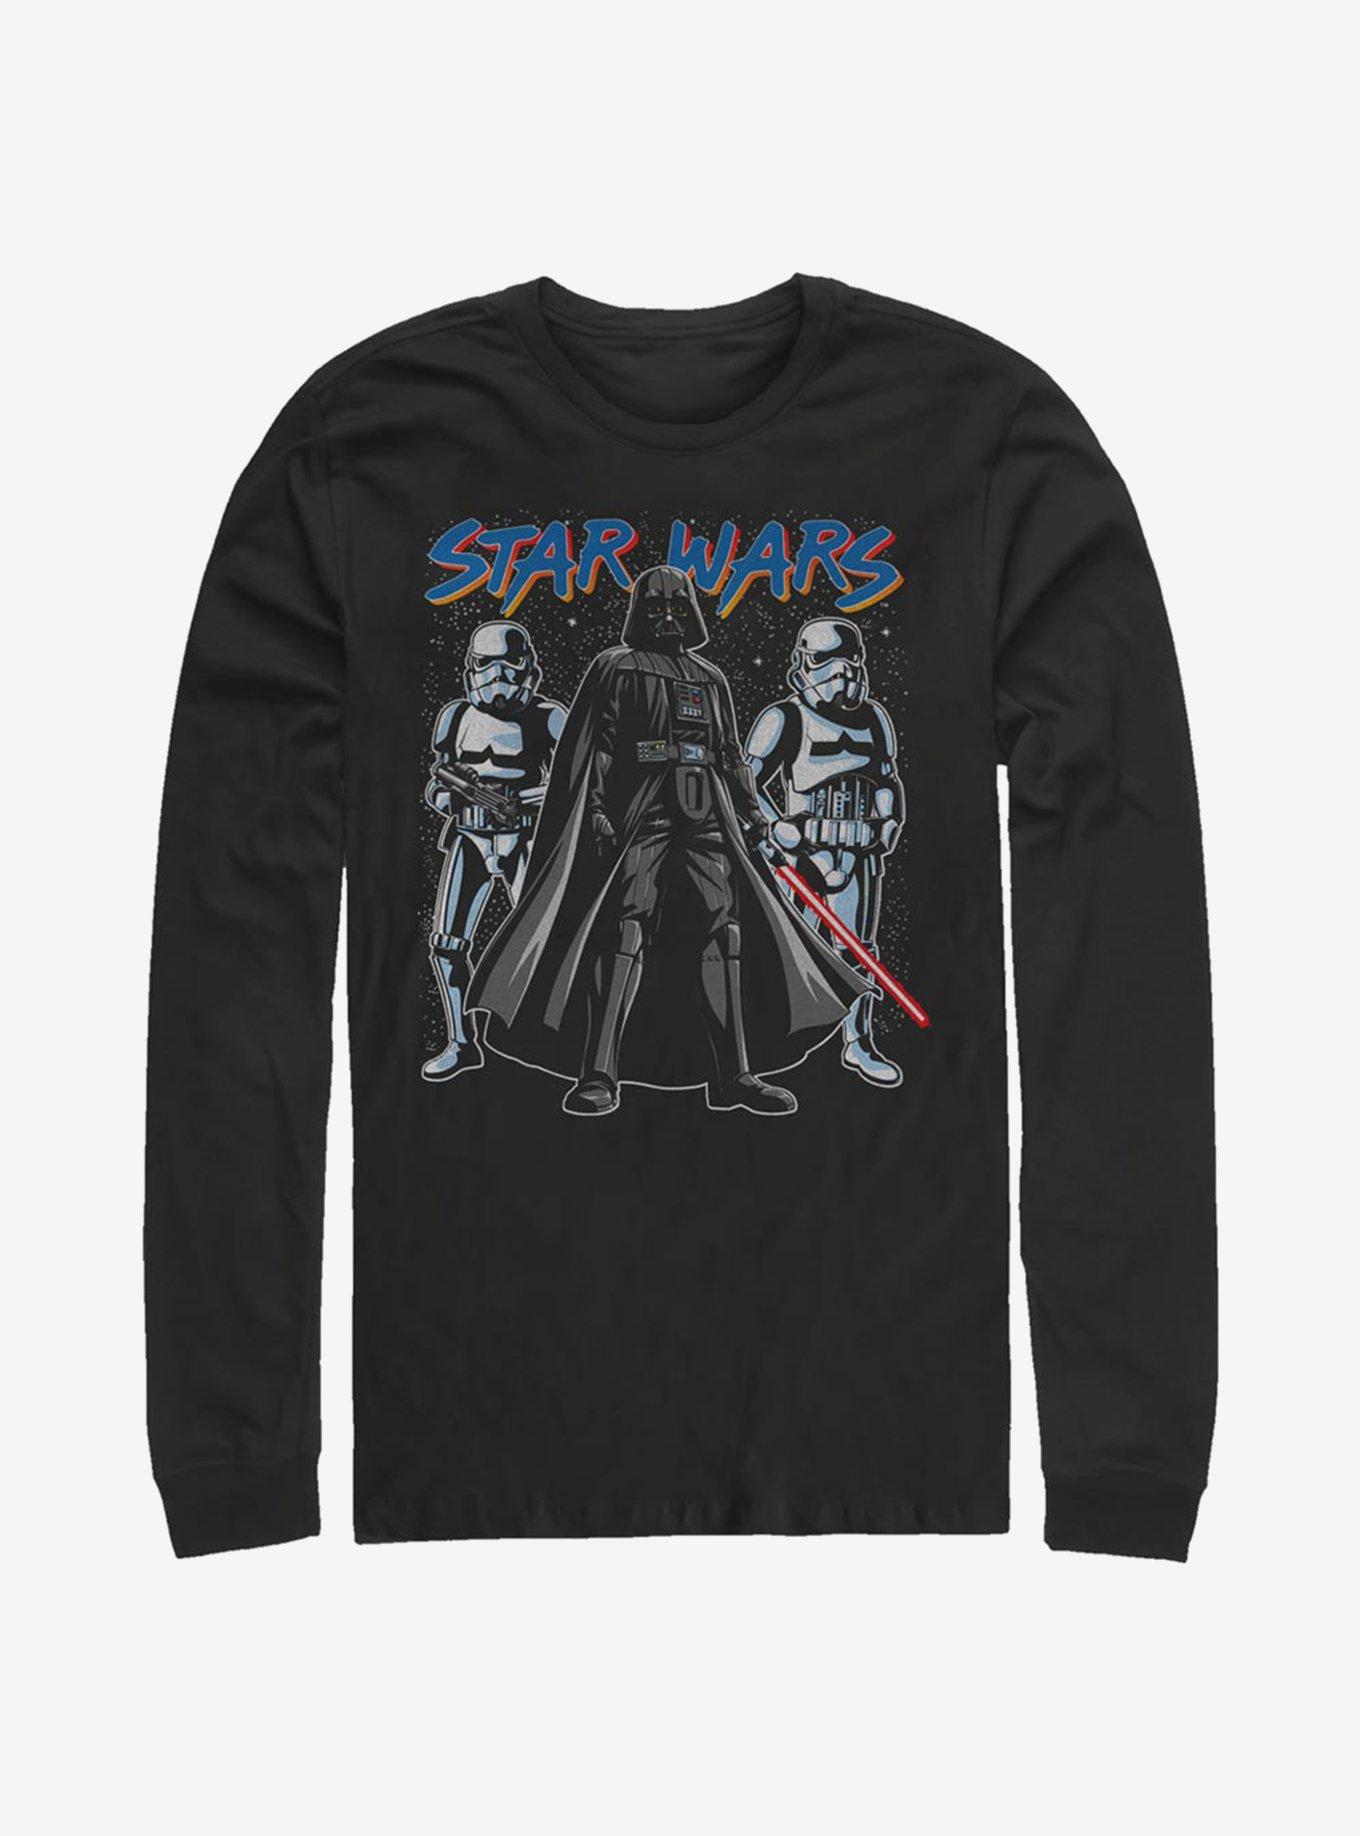 Star Wars Stand Your Ground Long-Sleeve T-Shirt, BLACK, hi-res